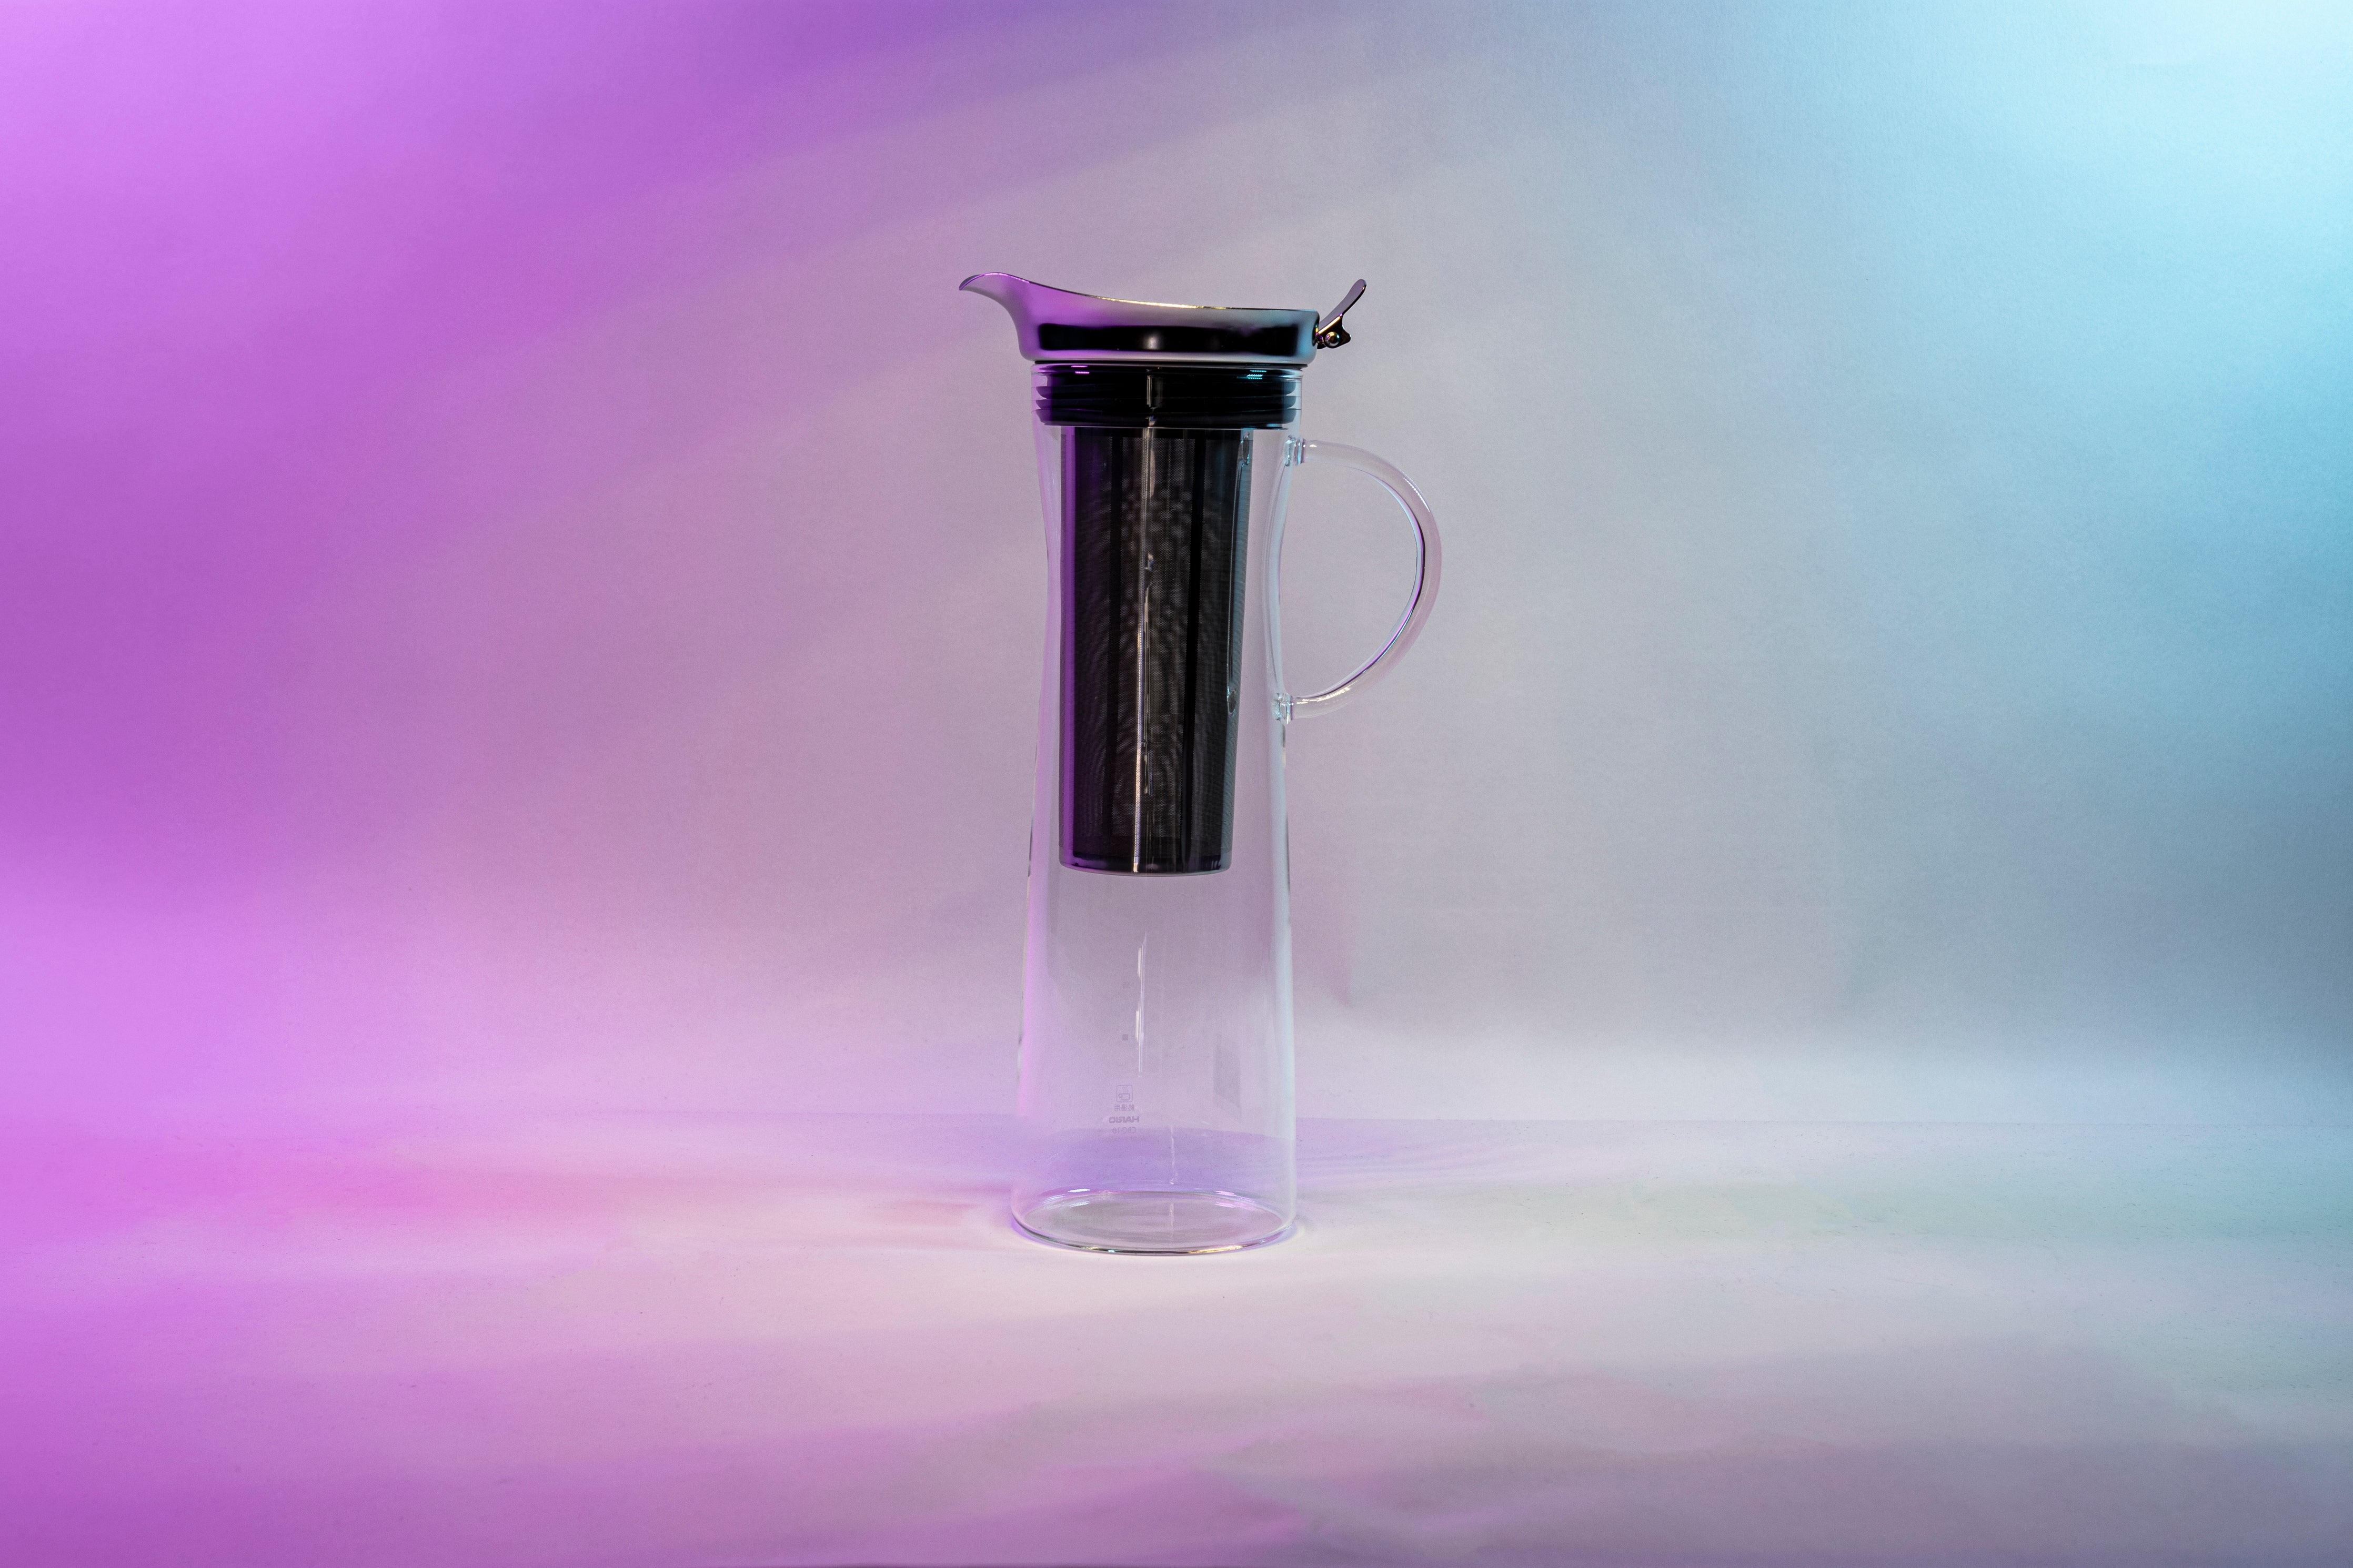 Hario® Cold Brew Coffee Pitcher – Fresh Roasted Coffee